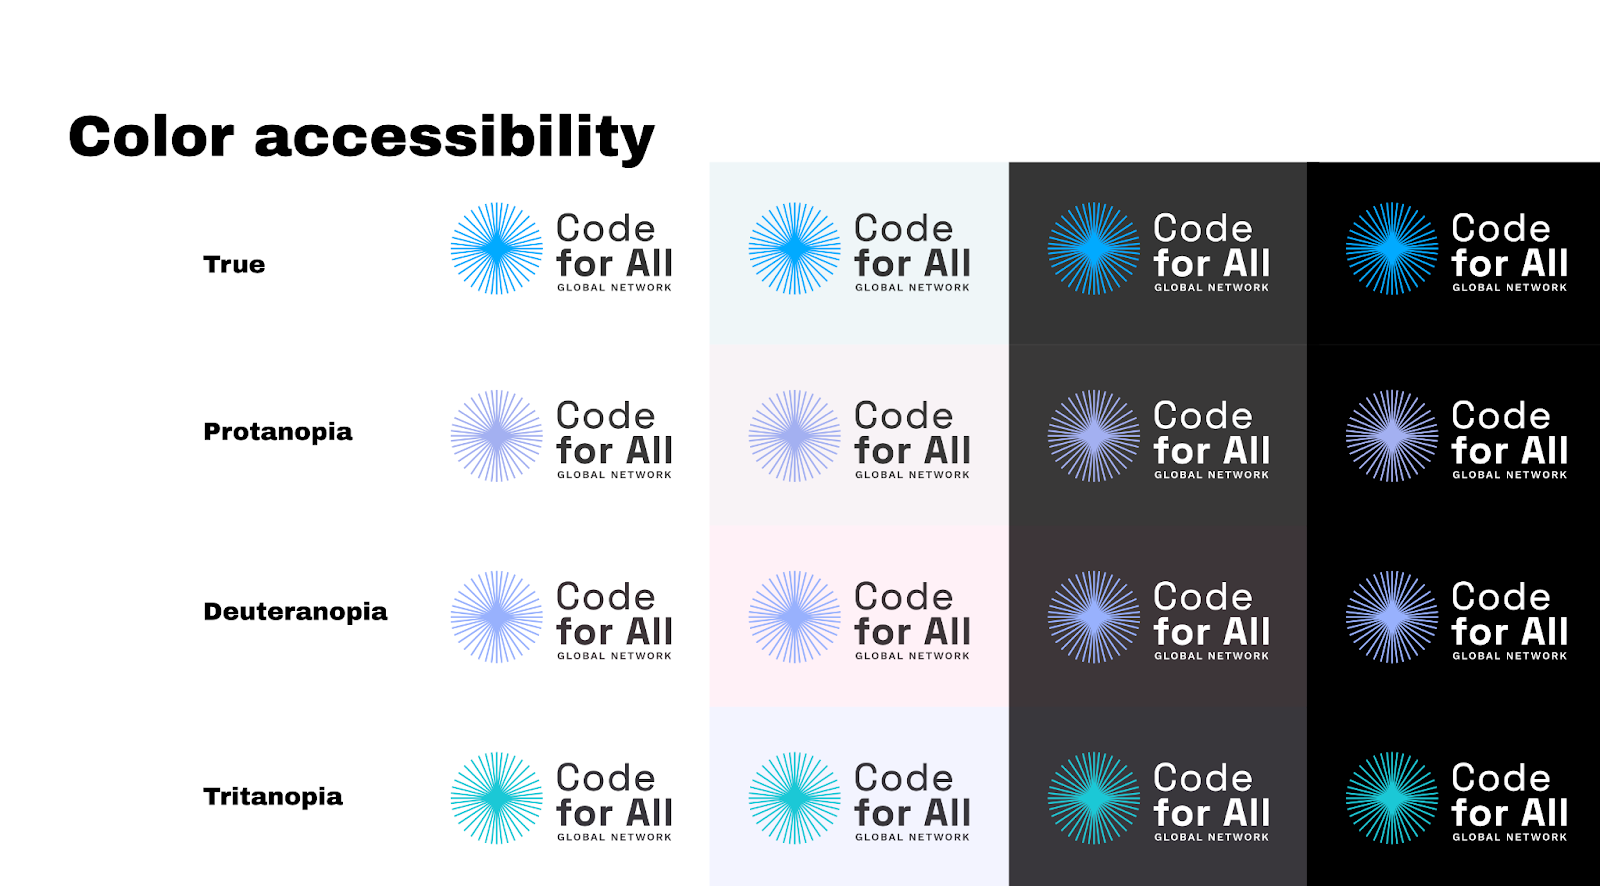 Composite of the new Code for All logo and color scheme.